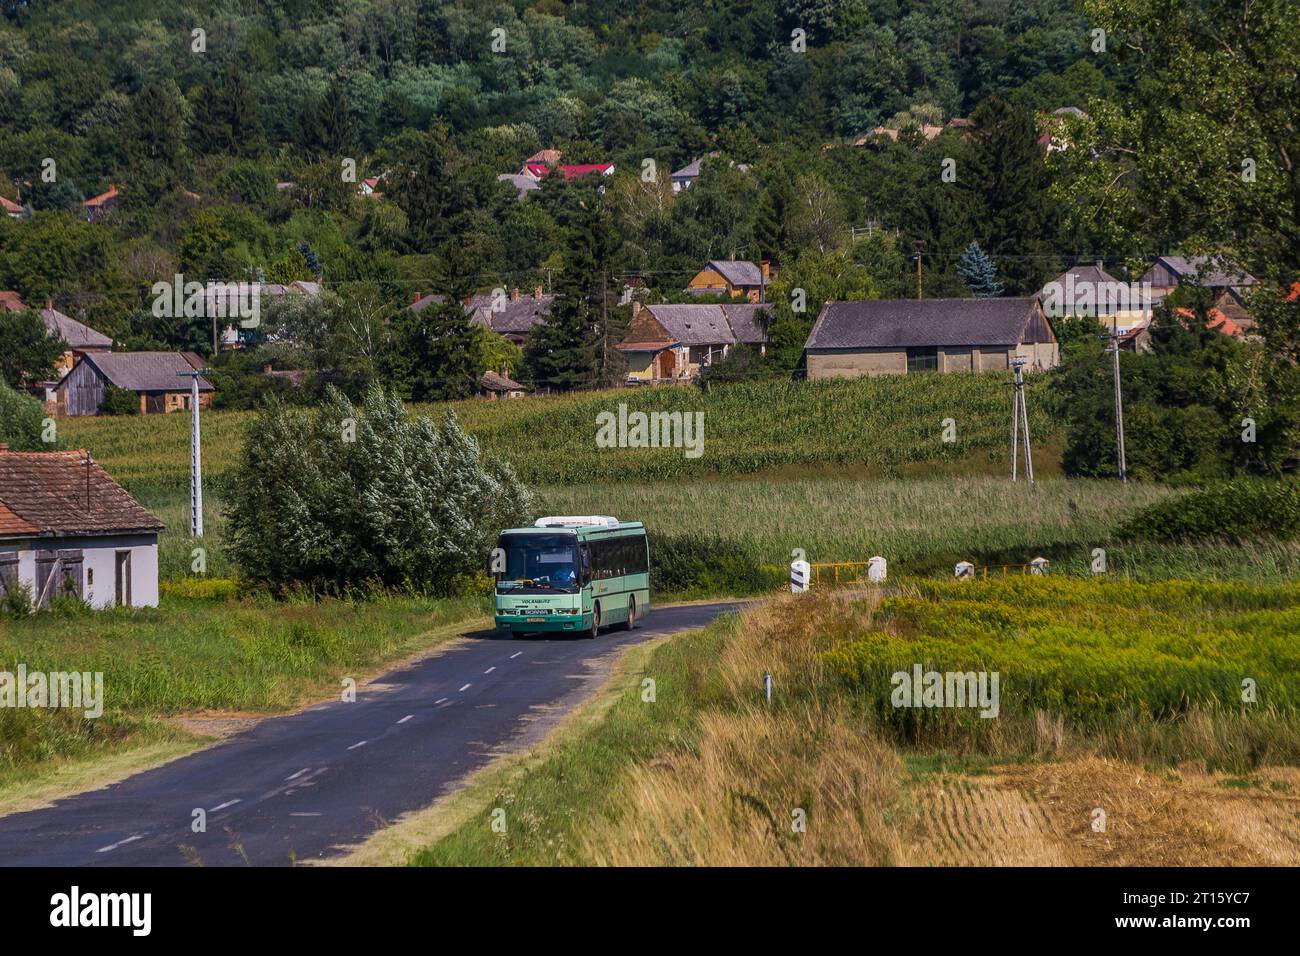 7.08.2021. Hungary, road between Zselickisfalud and Szilvasszentmarton. Ikarus EAG came here from Kaposvar. Stock Photo